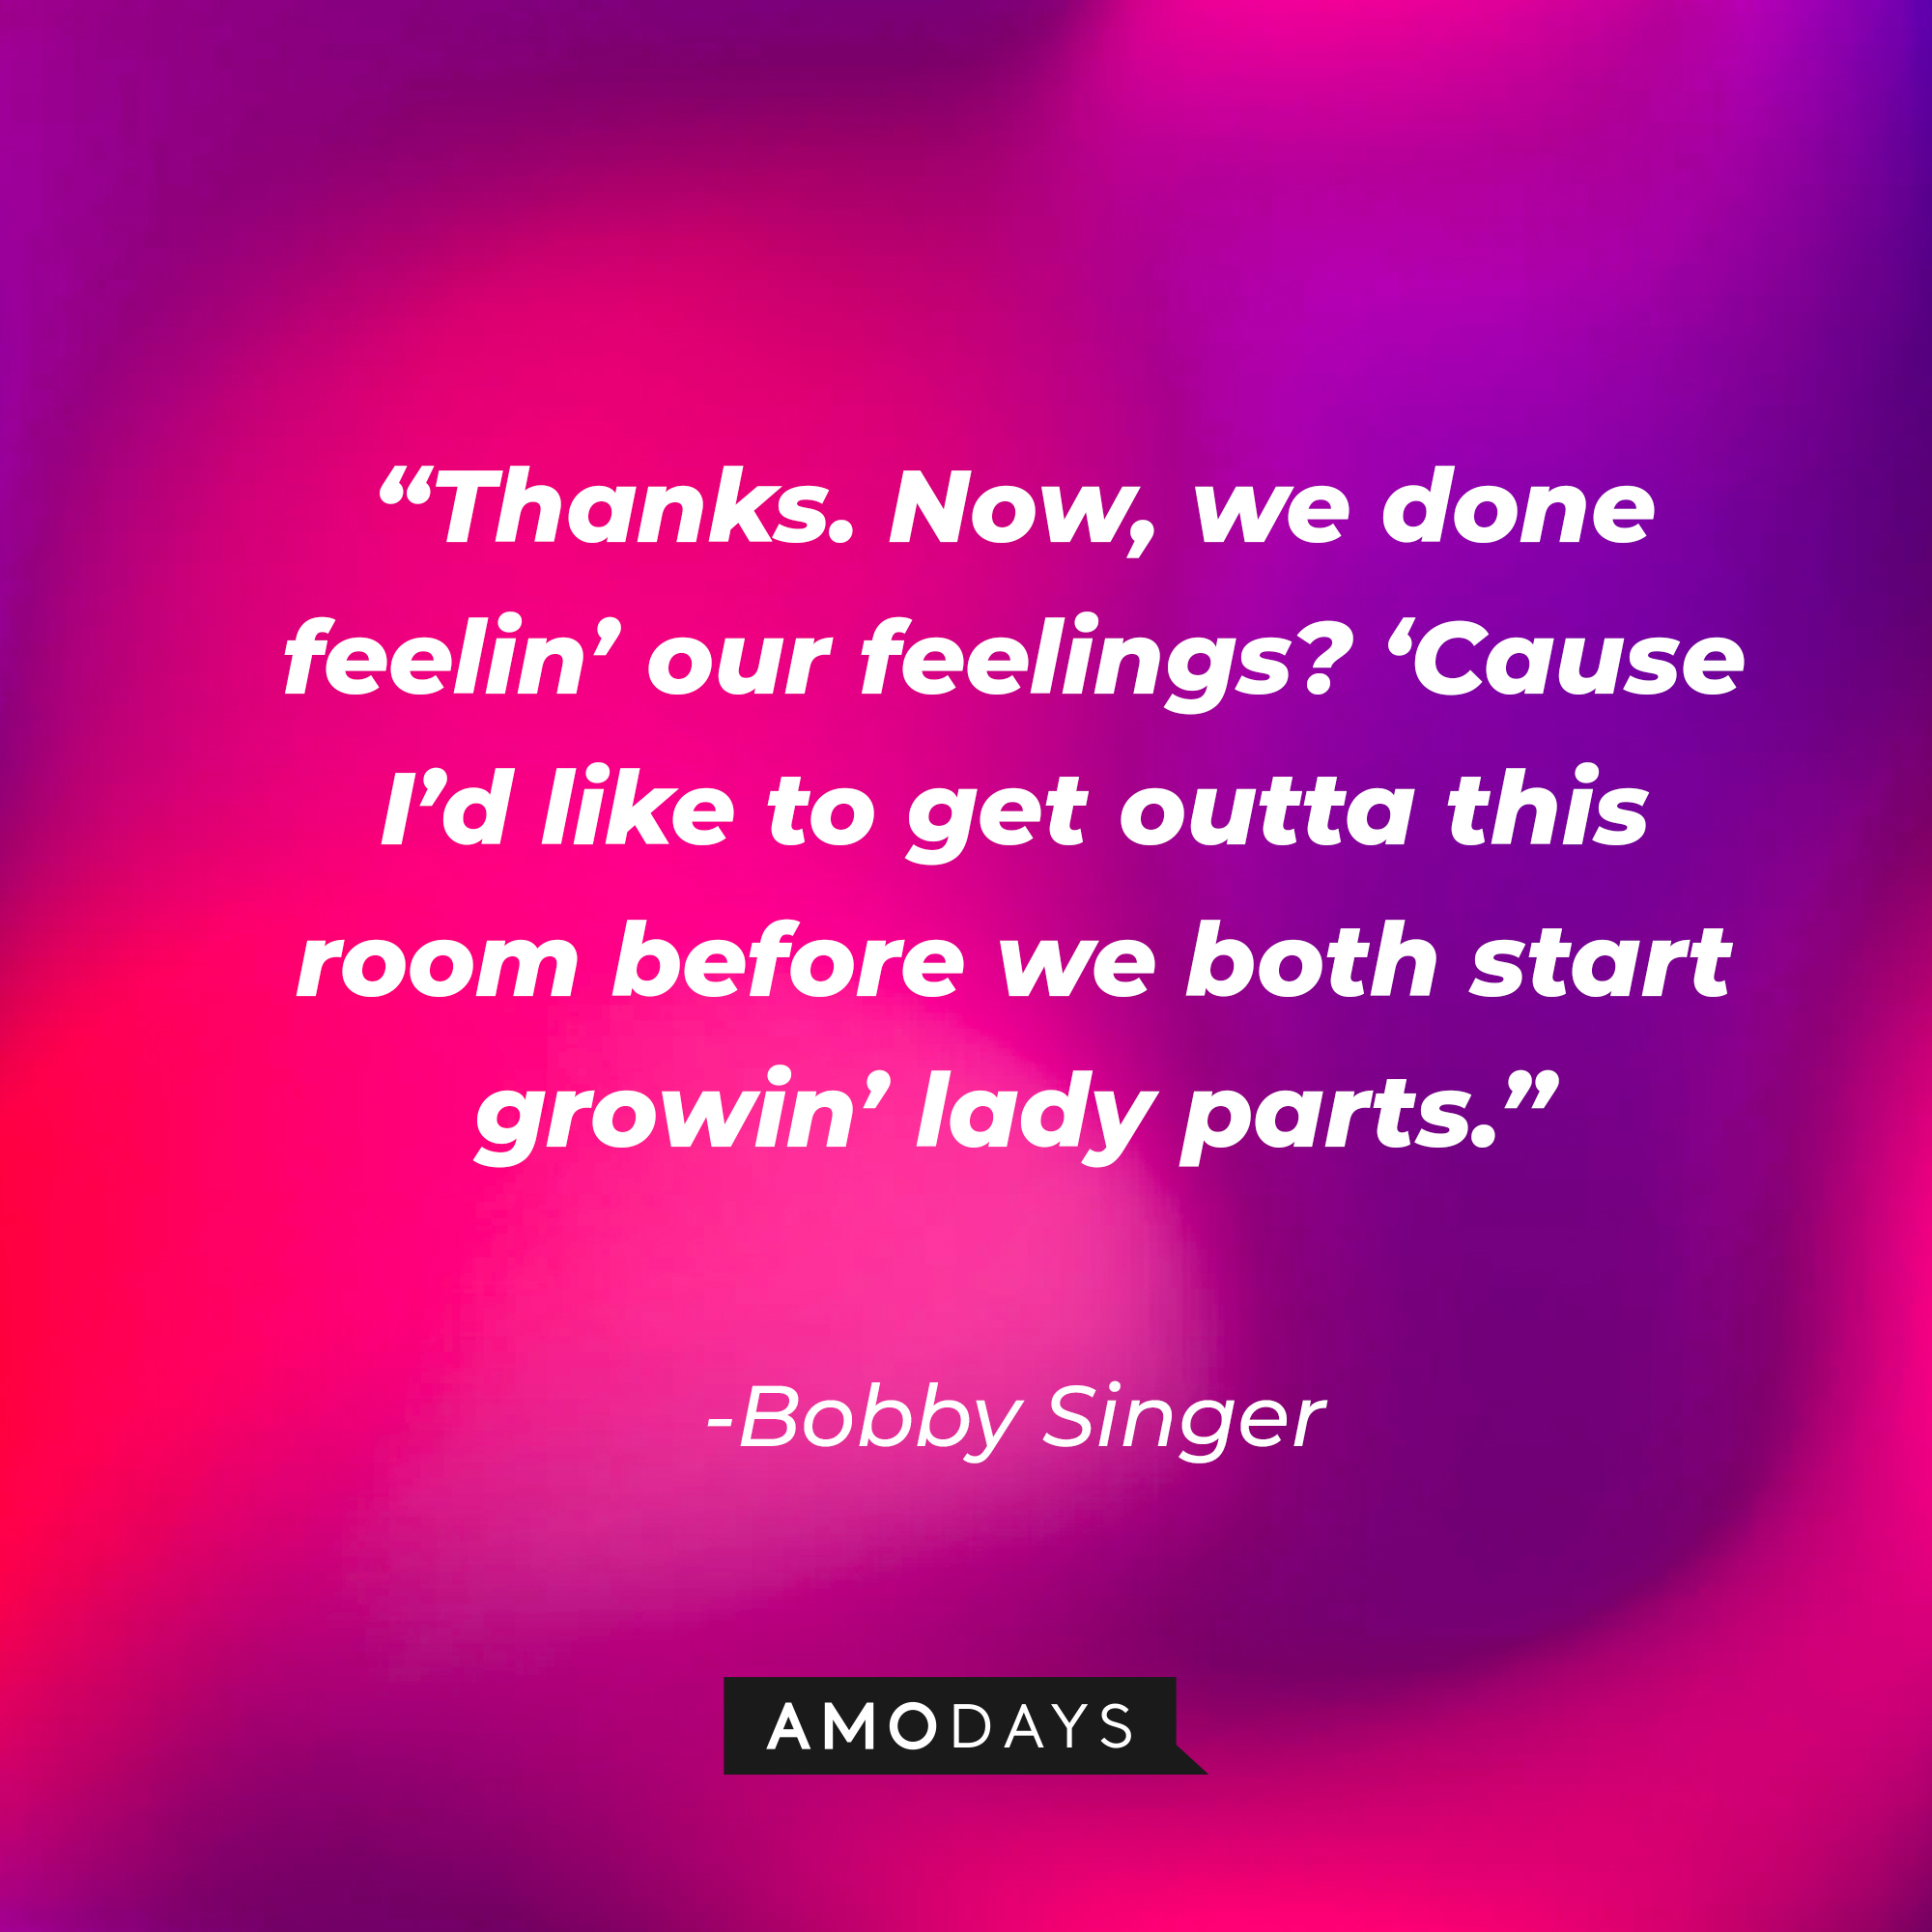 Bobby Singer's quote: "Thanks. Now, we done feelin' our feelings? 'Cause I'd like to get outta this room before we both start growin' lady parts." | Source: Amodays